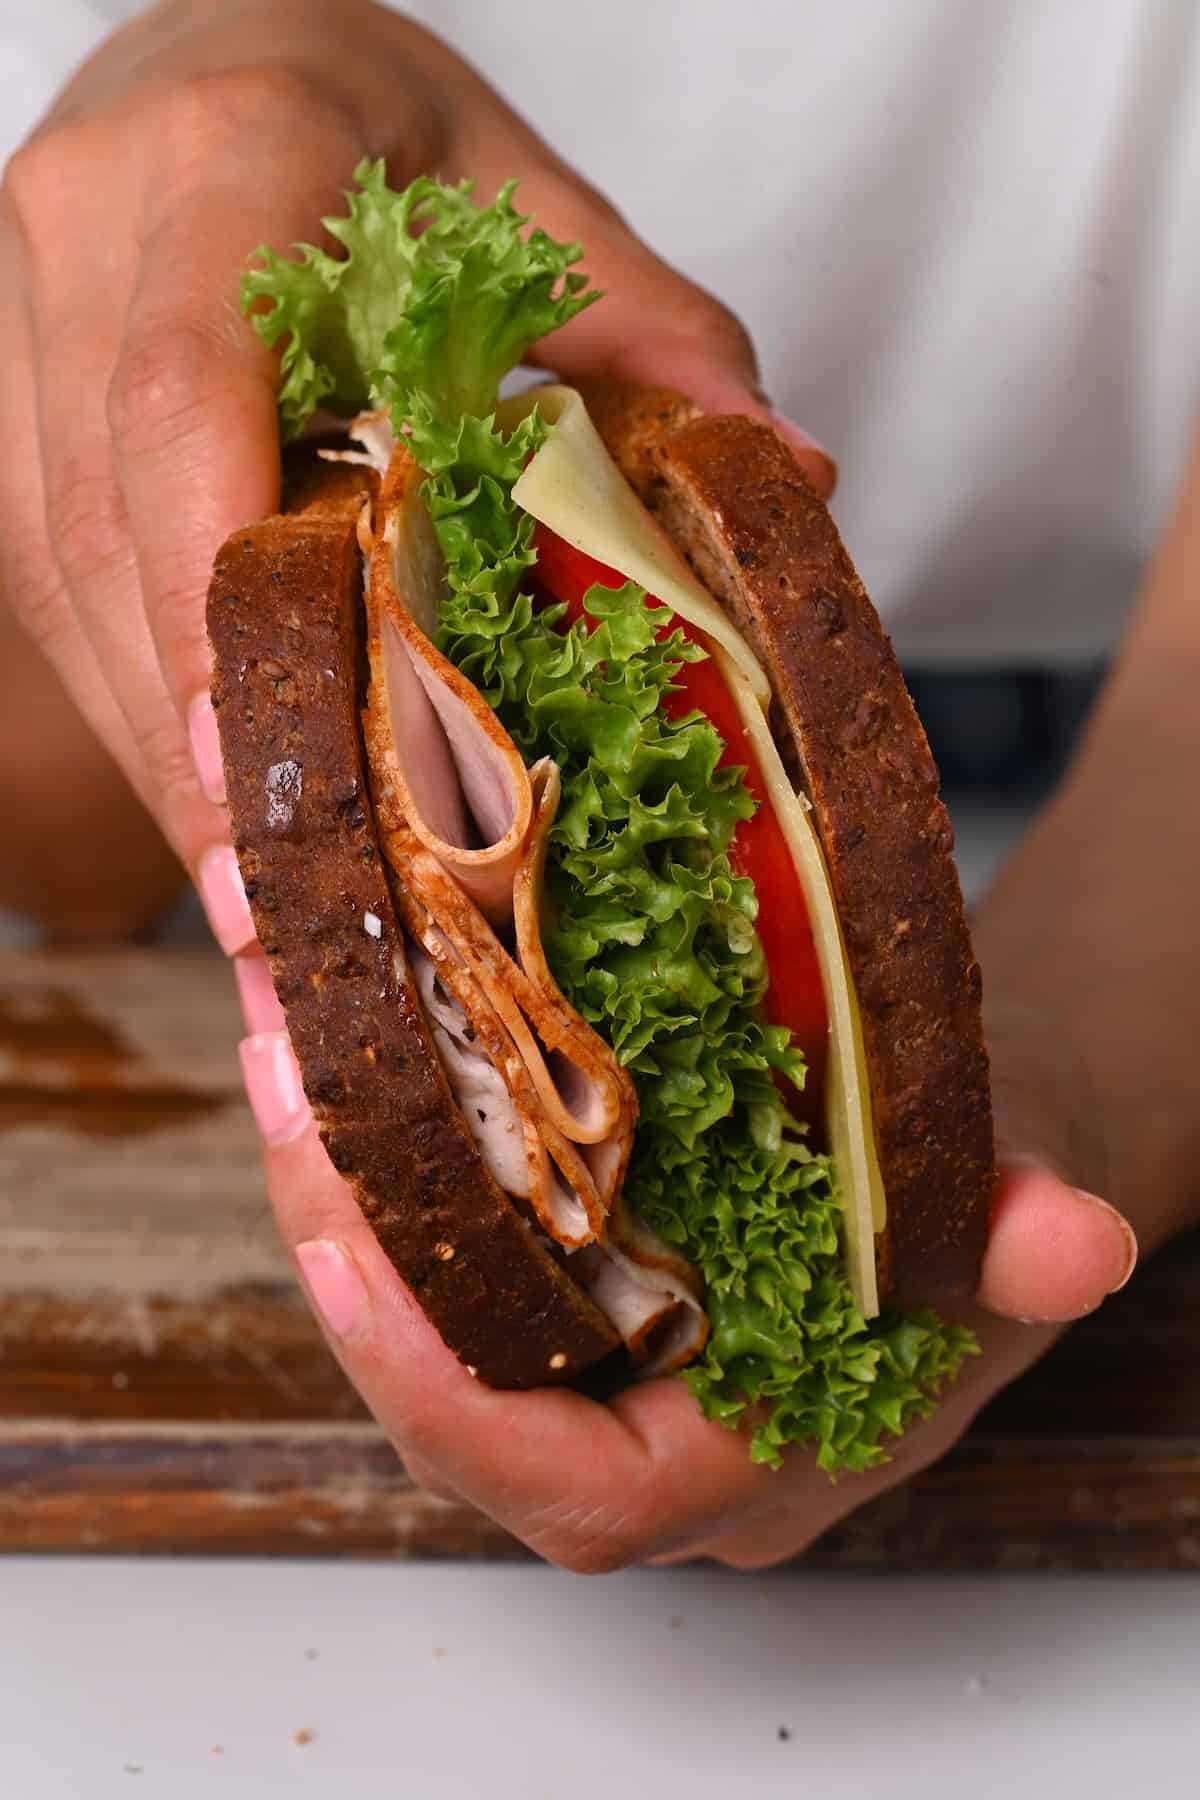 A turkey sandwich with tomato and lettuce